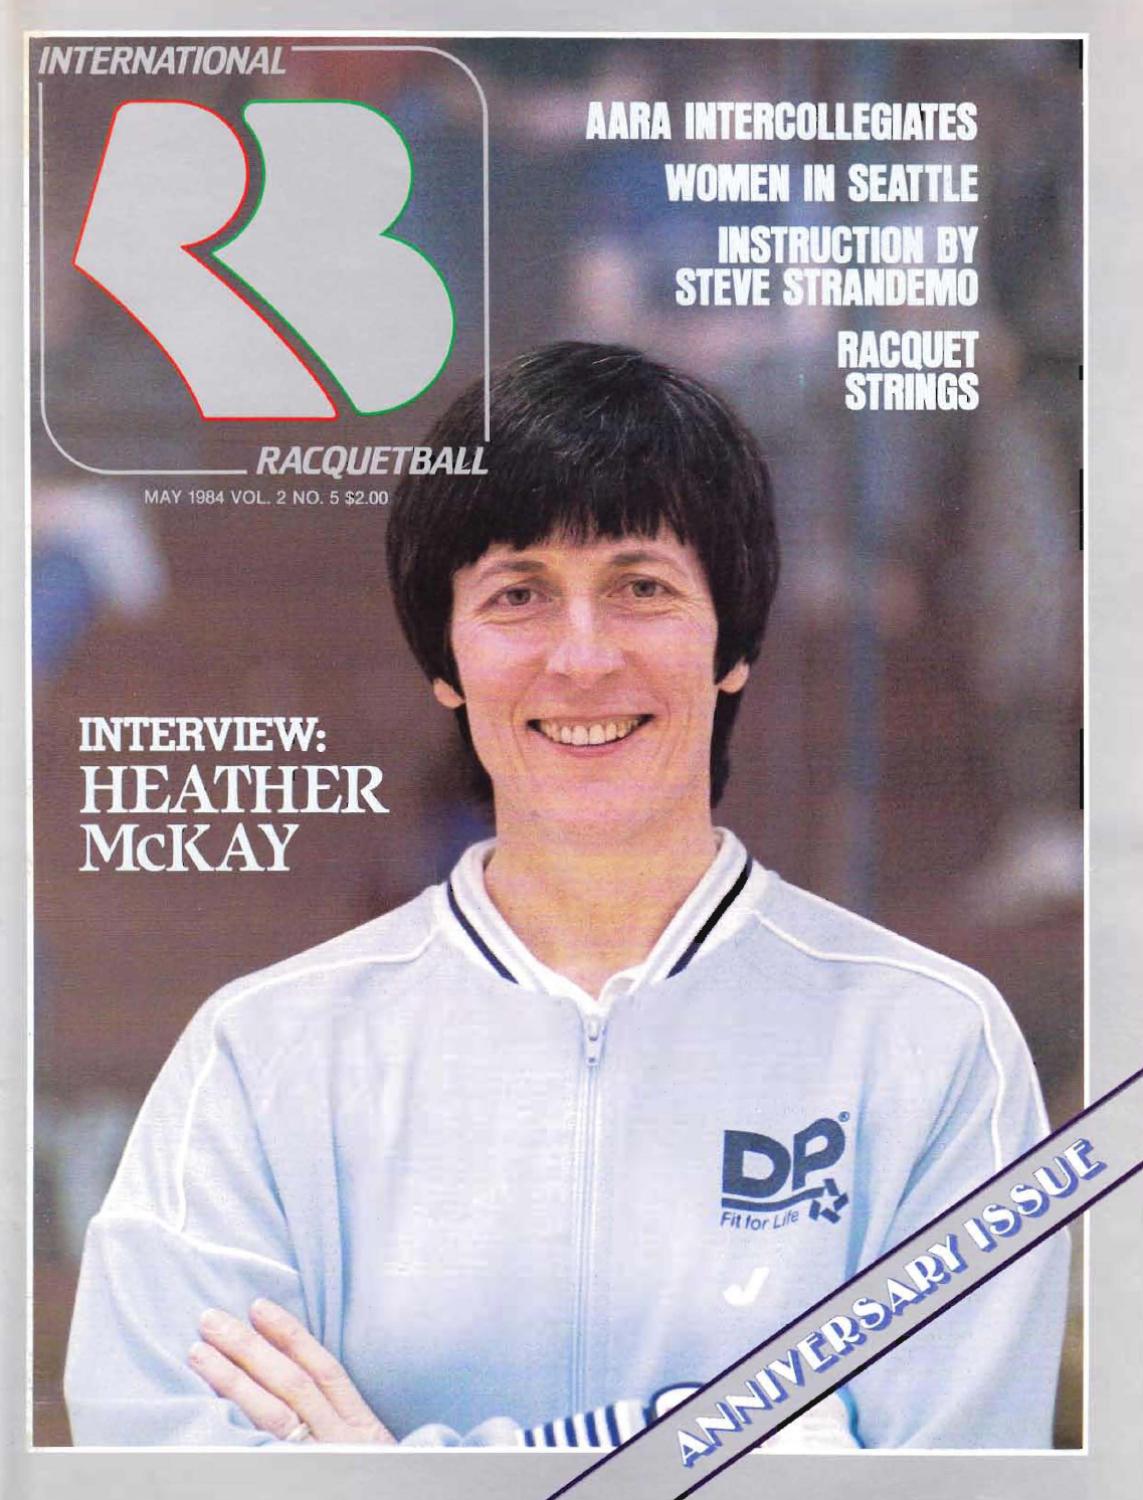 International Racquetball, May 1984 cover